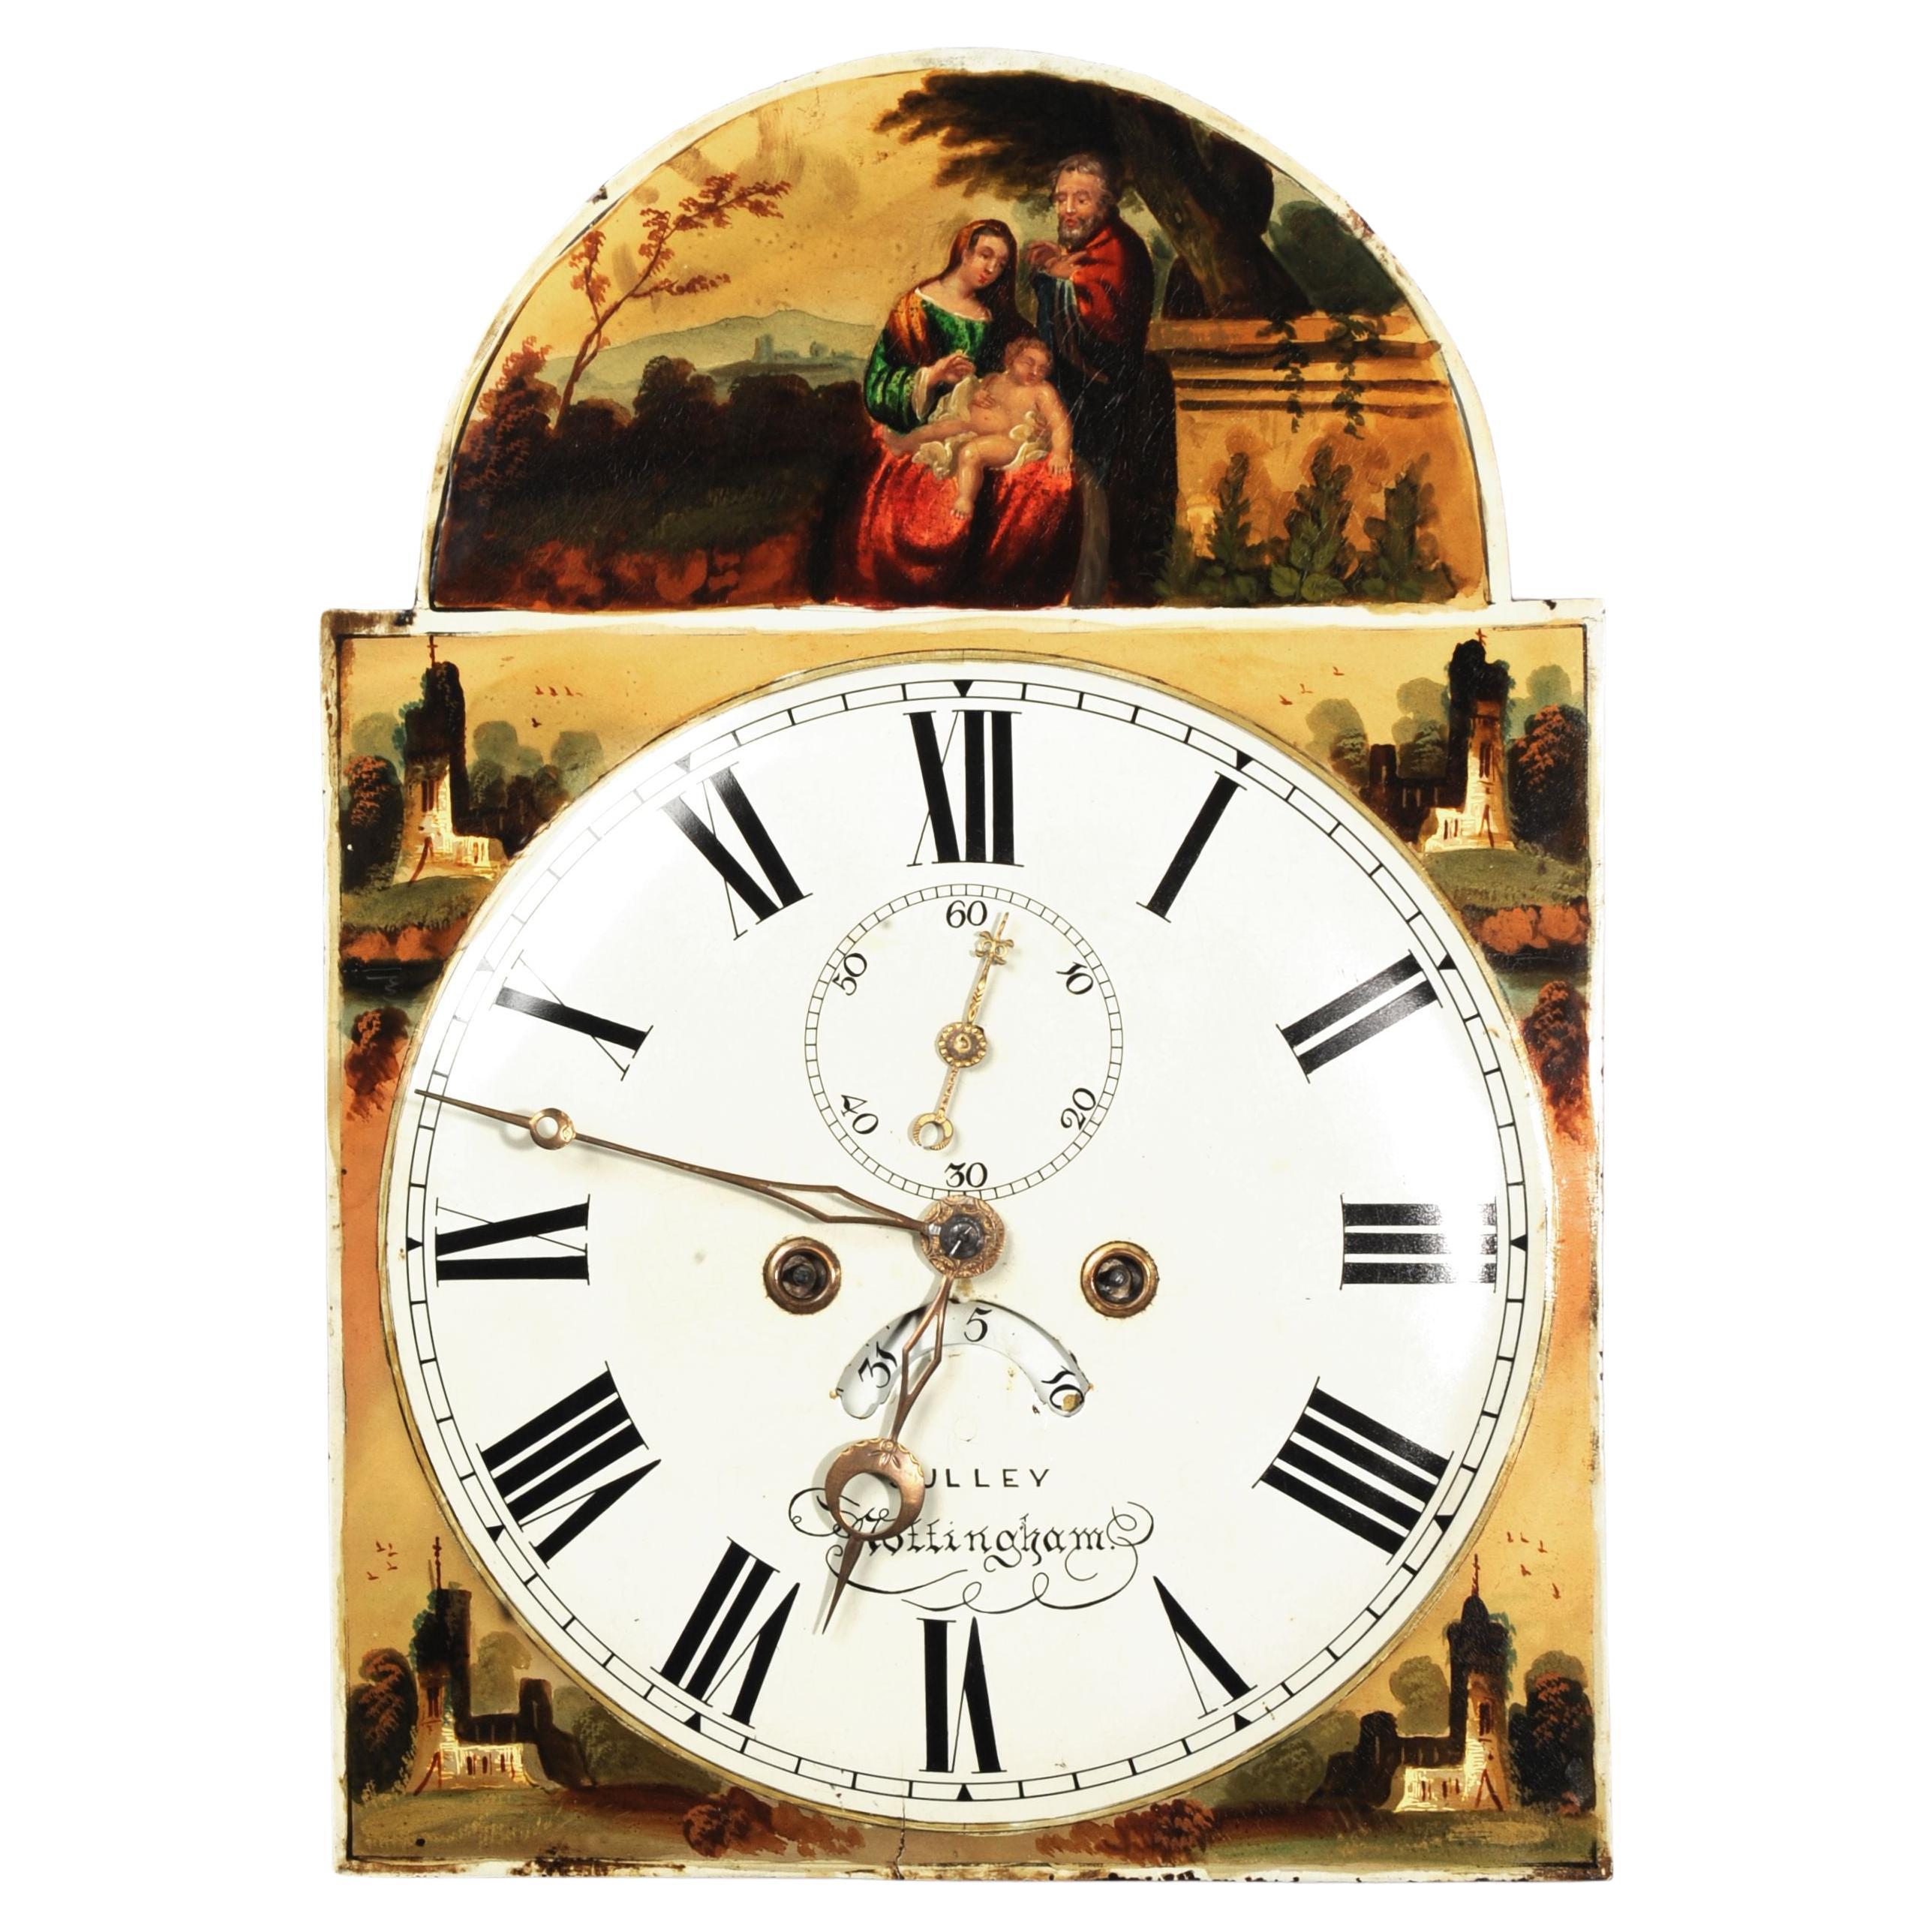 Christmas Antique English Iron Clock Dial Face - Rare Holy Family Dial - Working